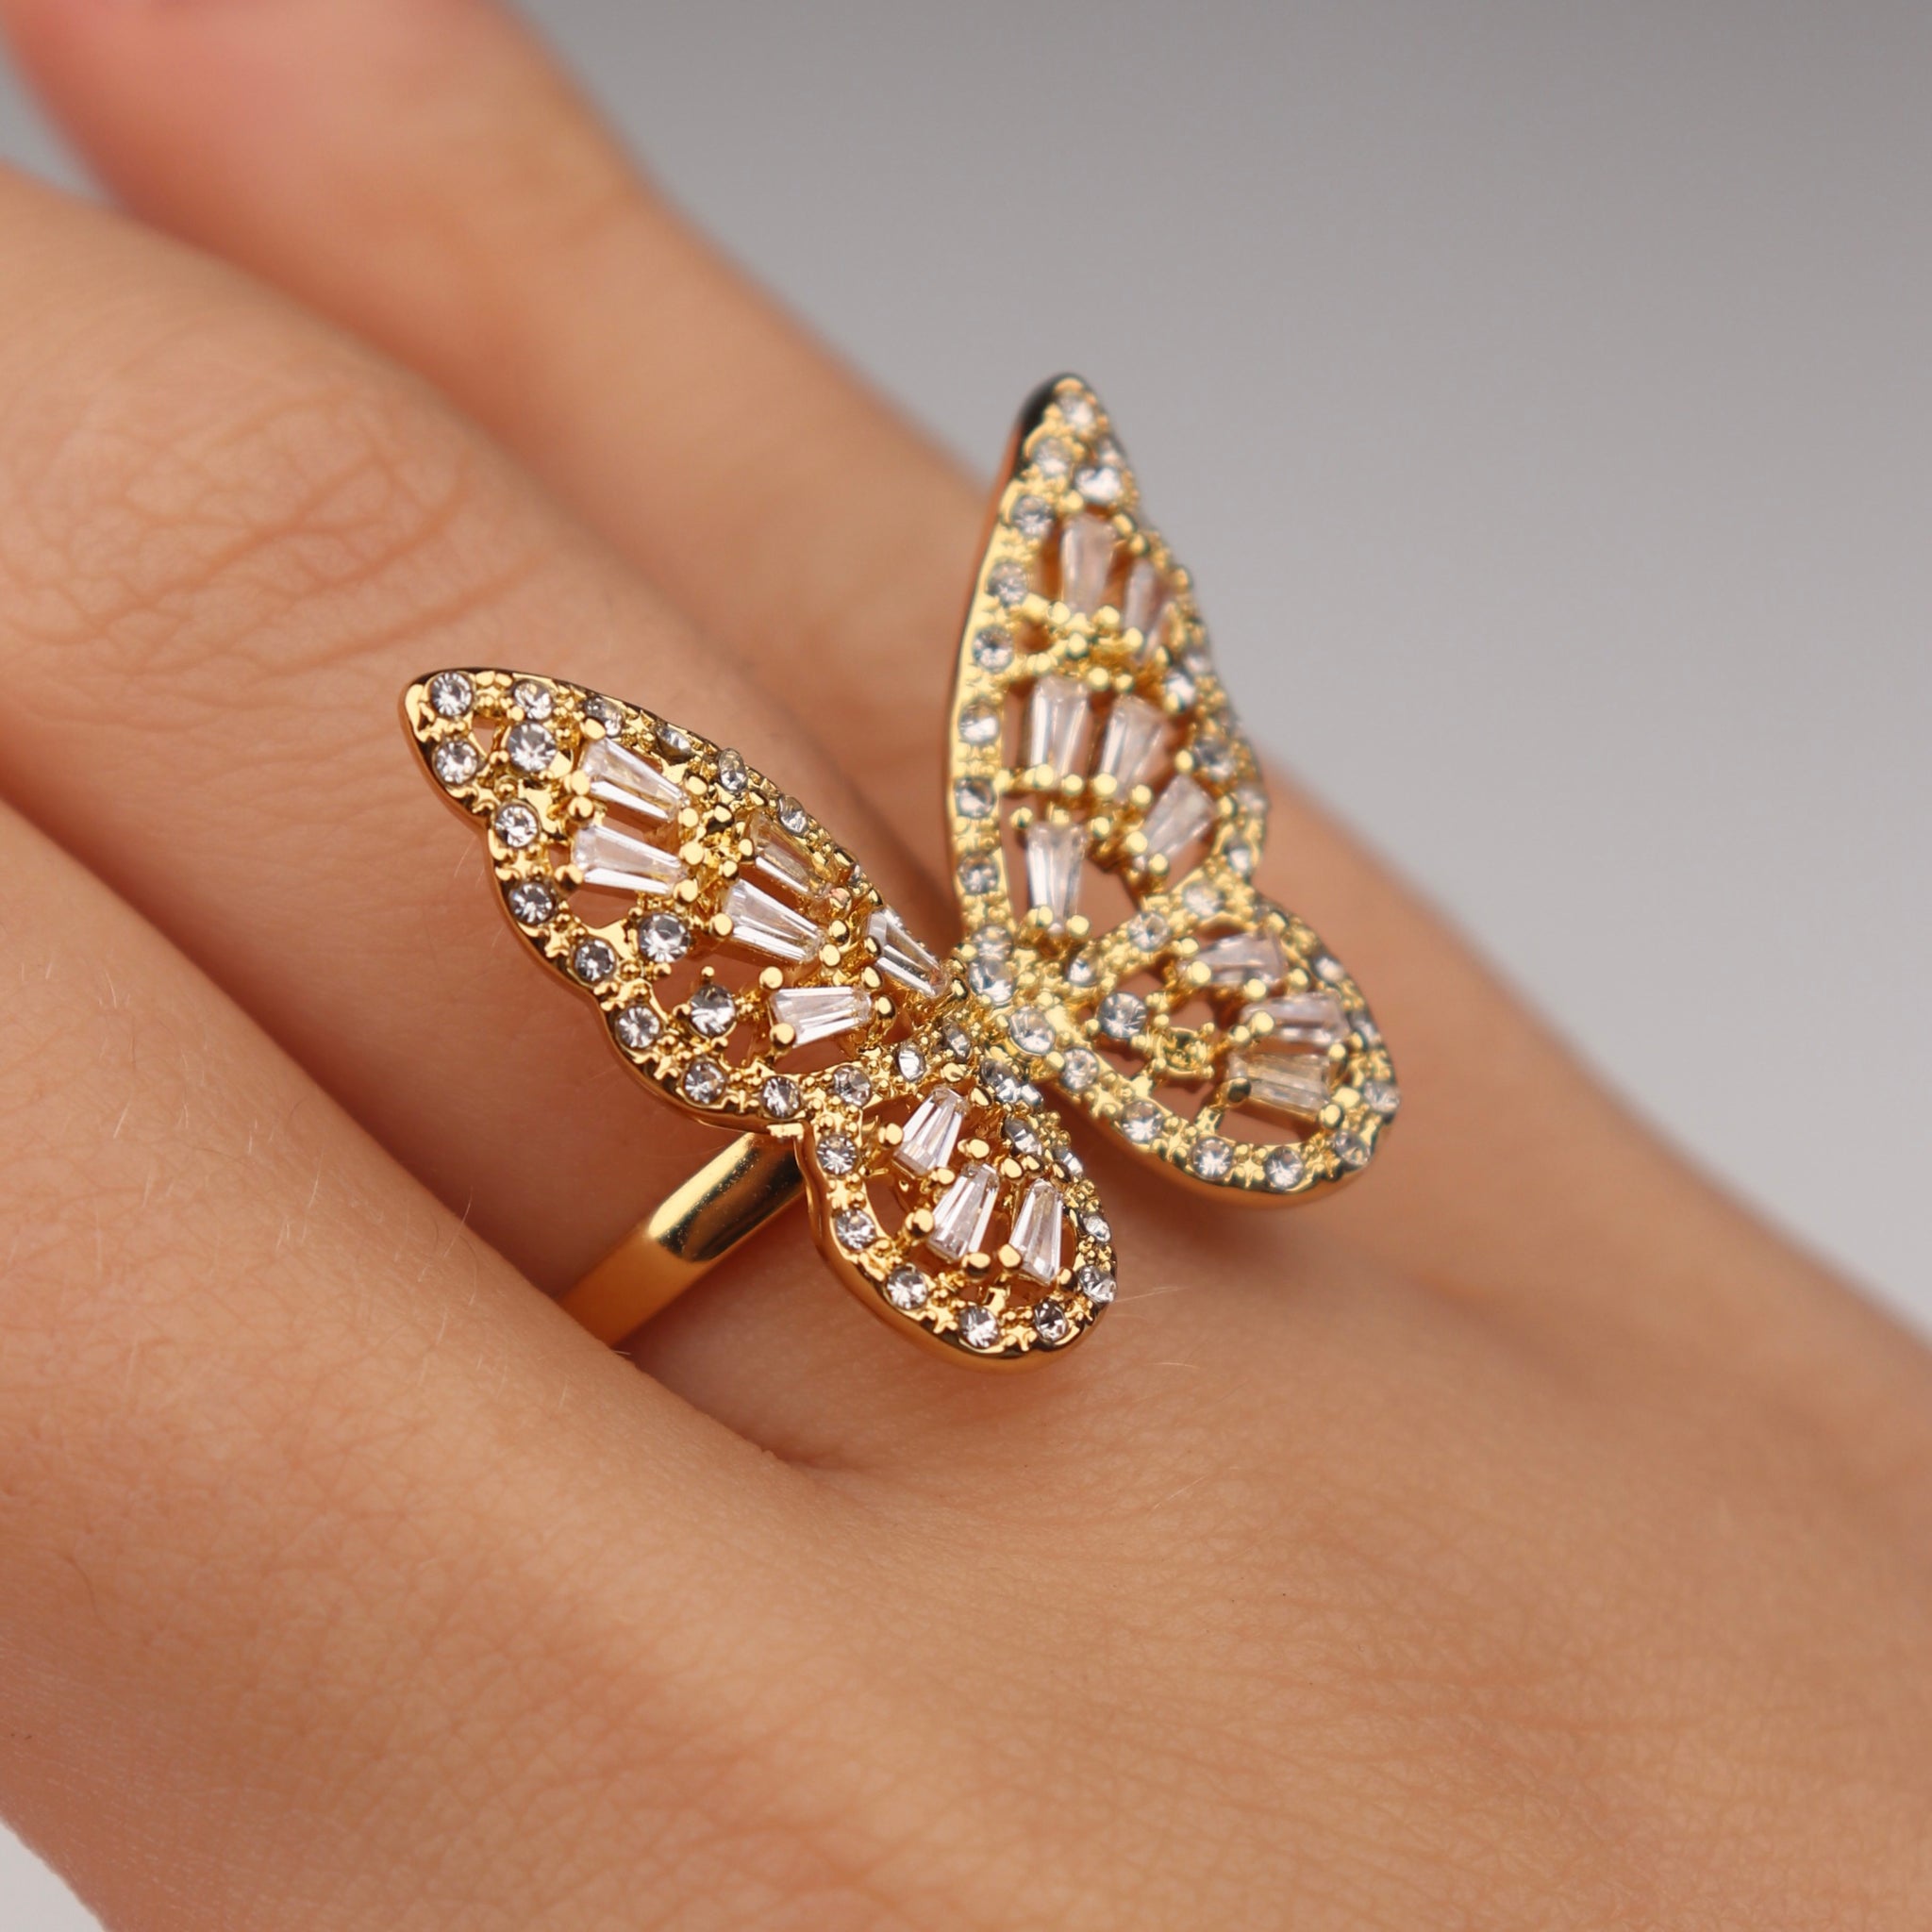 Diamond Butterfly Ring, Anniversary Ring, 14K White Gold Or Yellow Gold  0.40 Carat Unique Handmade Certified